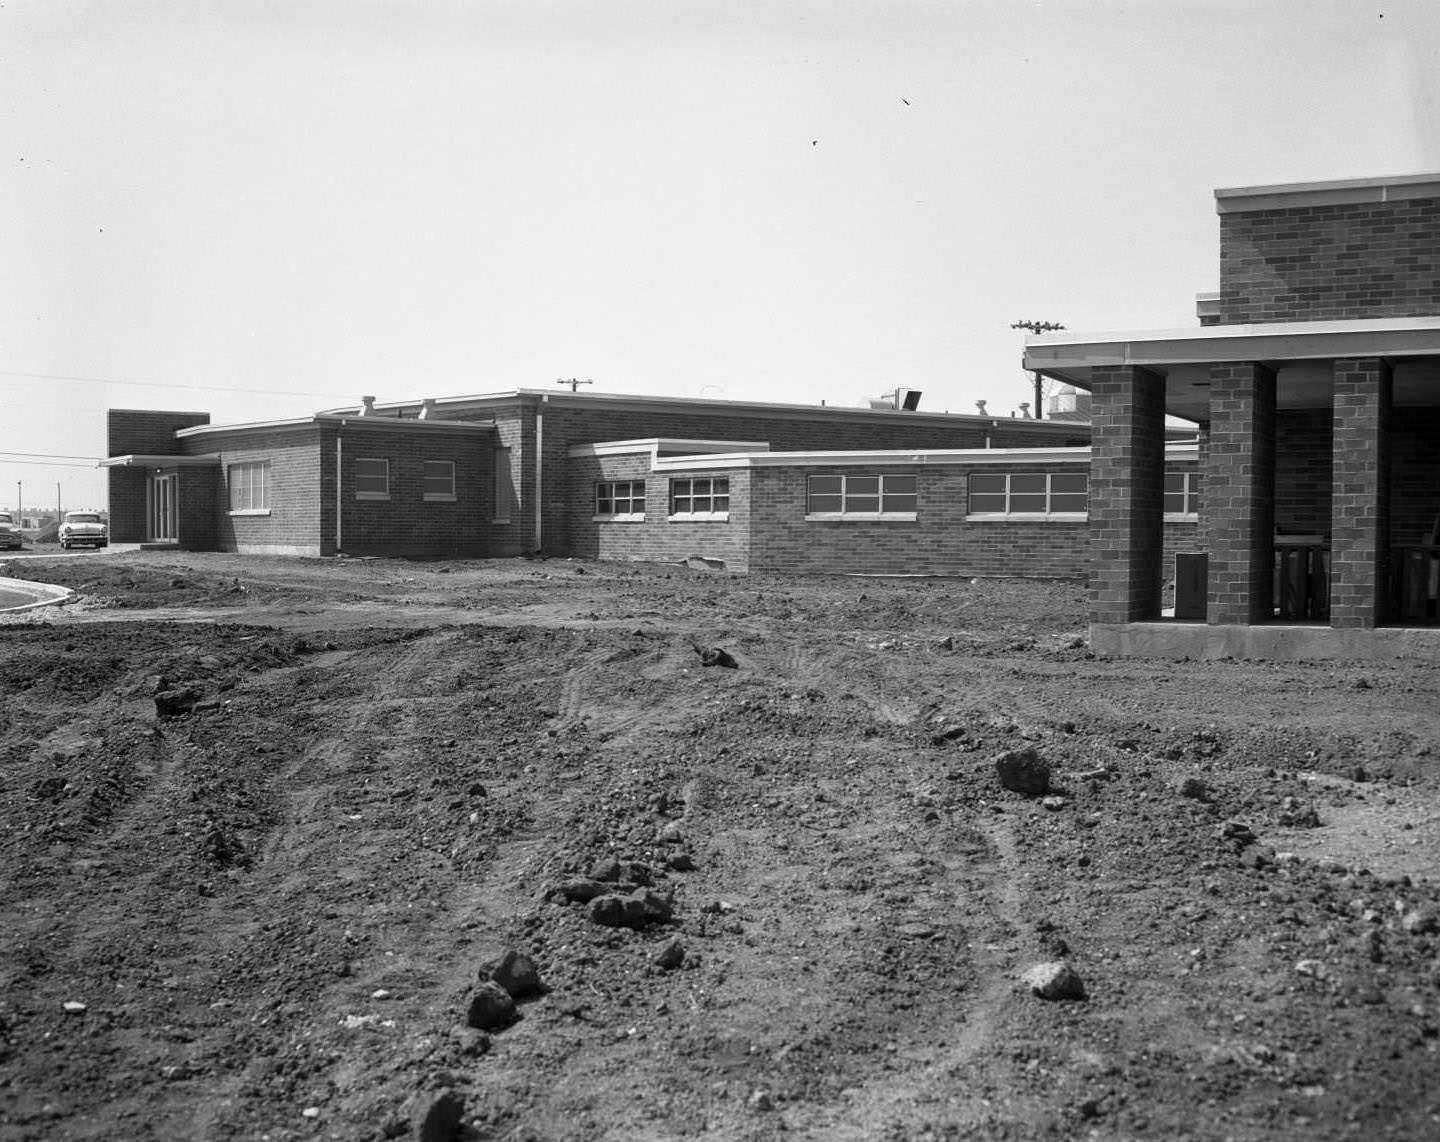 The exterior of a brick building on an Air Force base, 1956